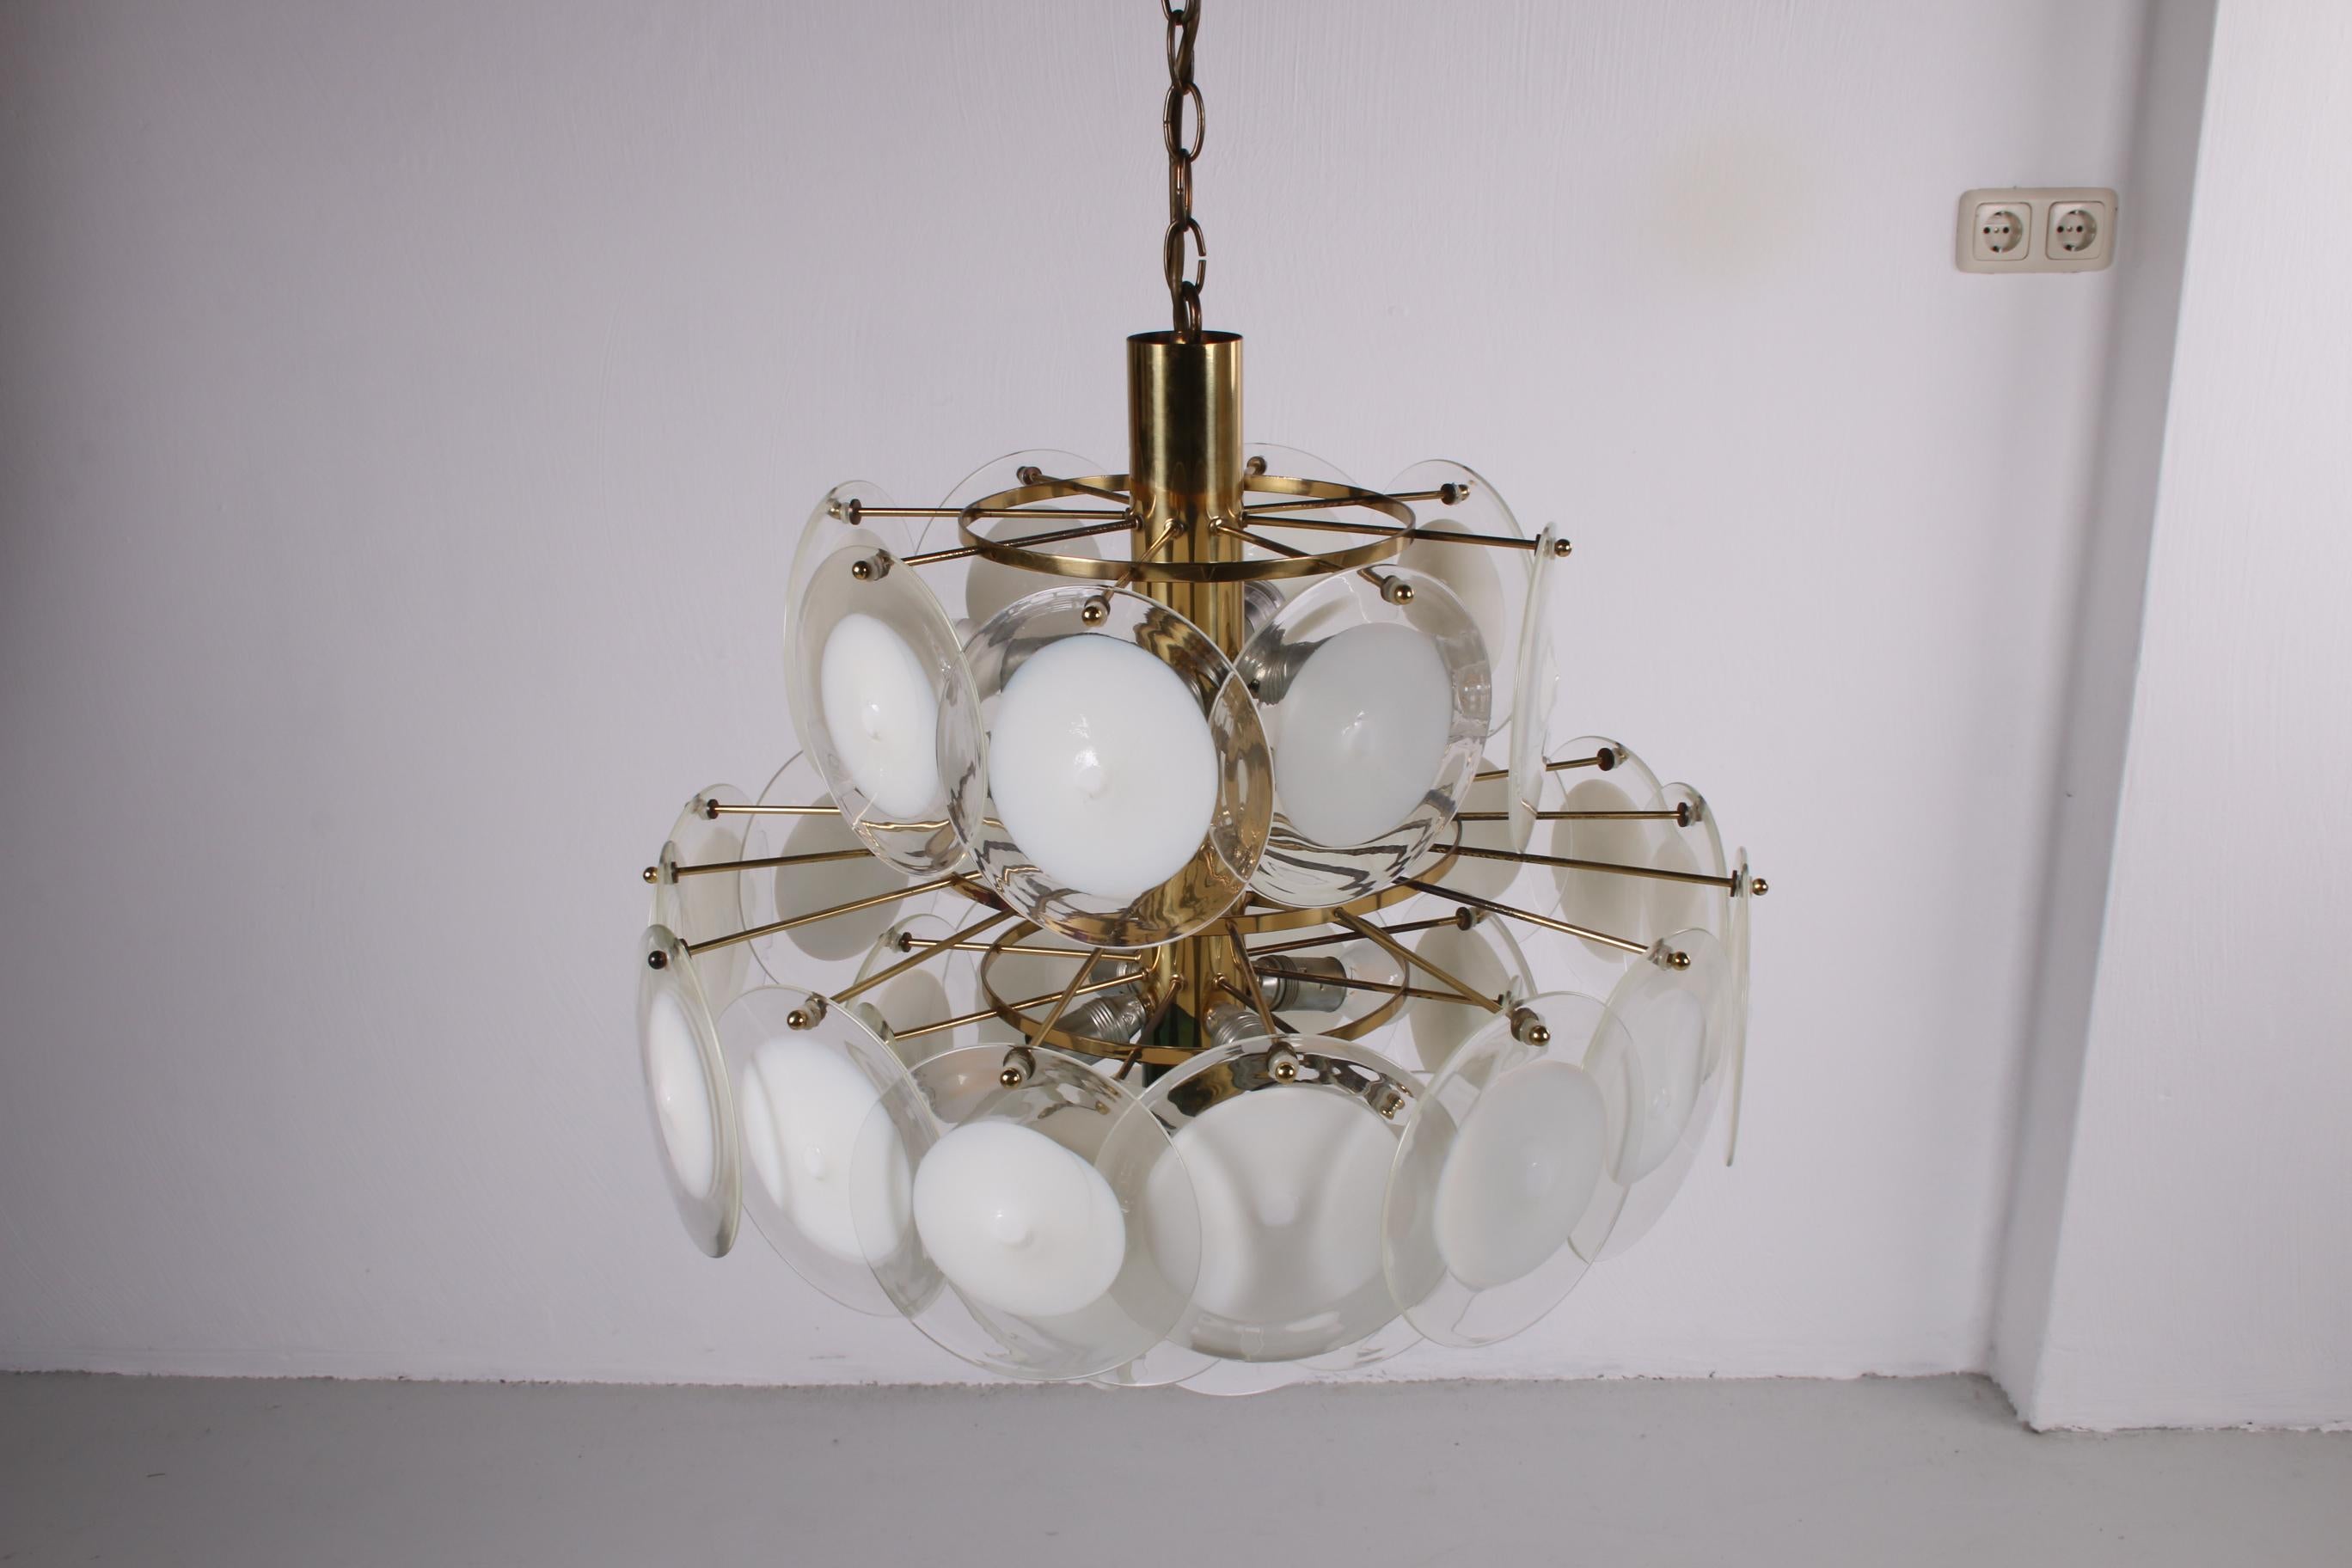 A beautiful lamp by the Italian brand AV Mazzega. It was a populair model in back in it's day and even now this piece still exudes style and class. 

The frame of this chandelier is made of gold coloured chrome. The 36 disks that surround the